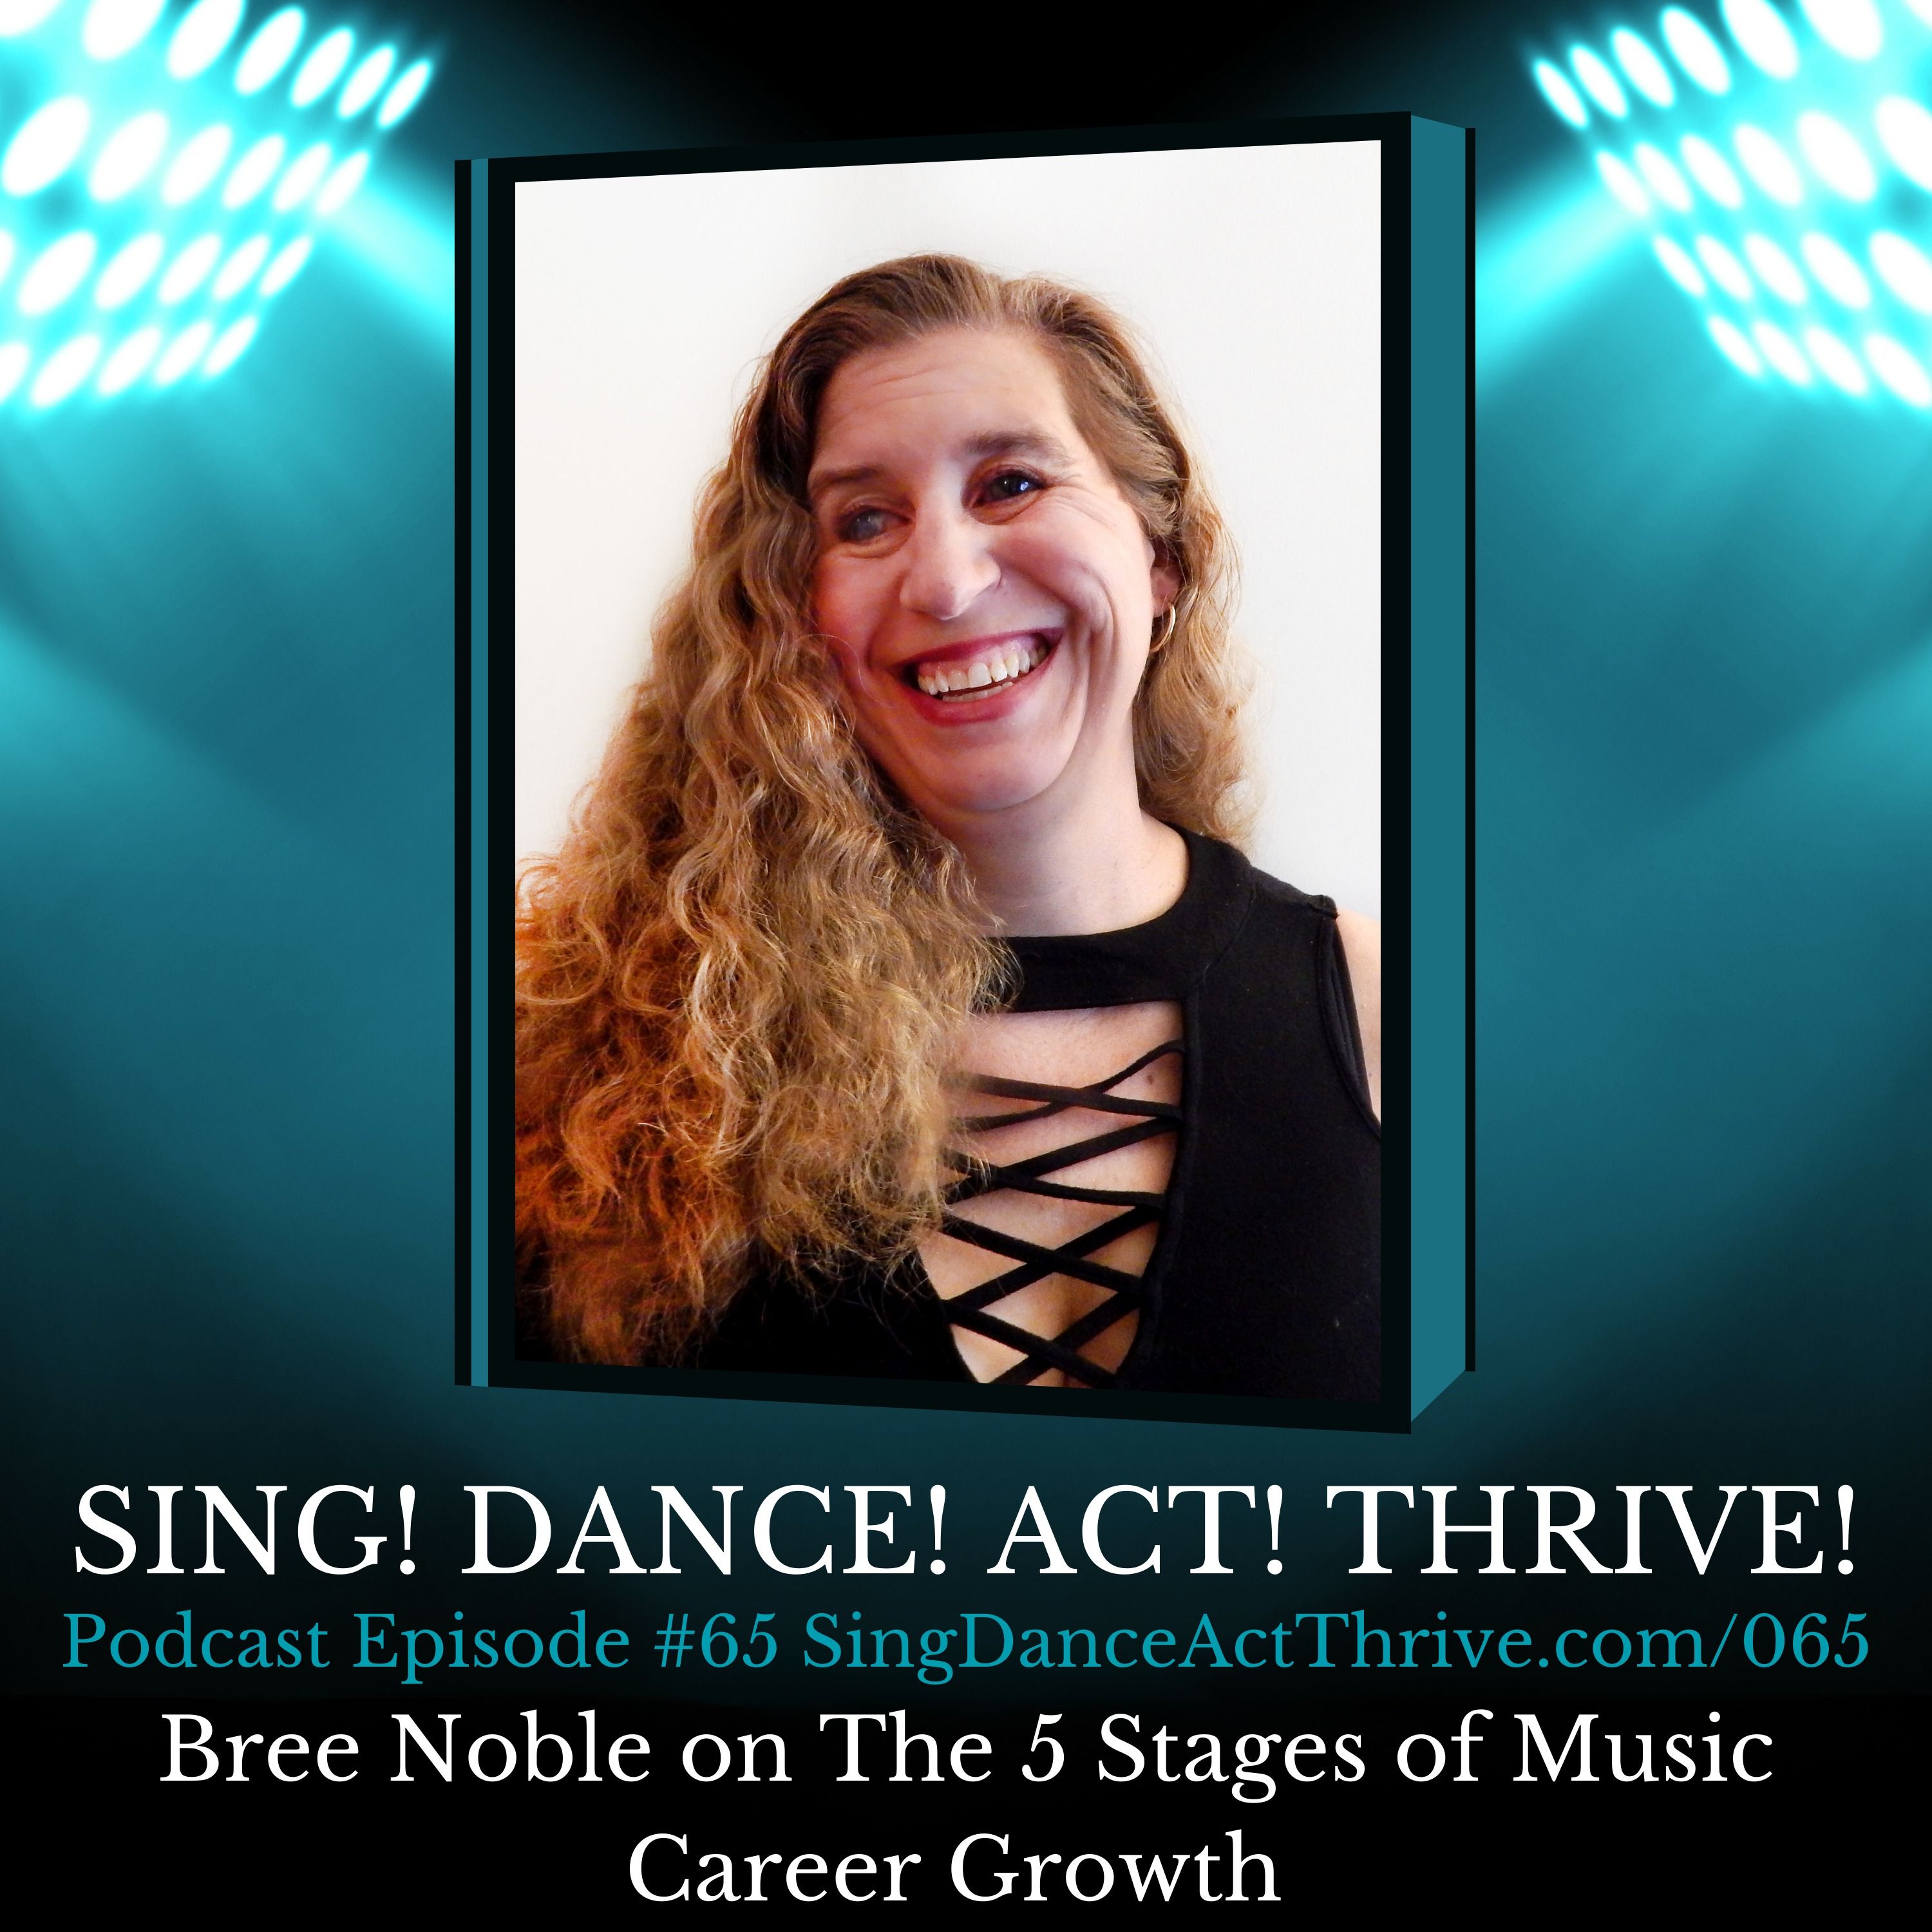 Bree Noble on 5 Stages of Music Career Success